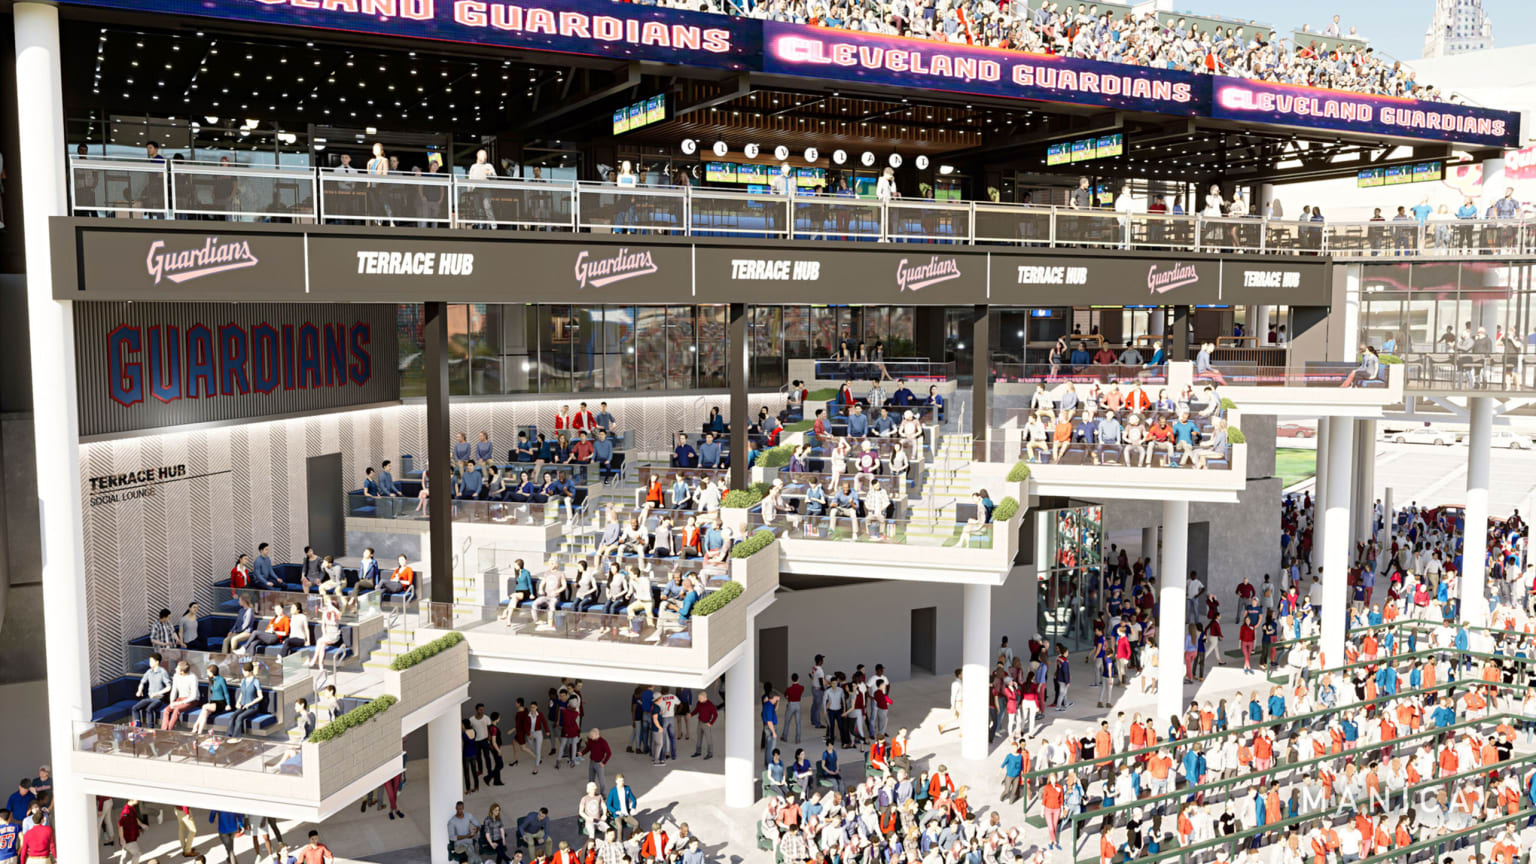 An artist's rendering of a terrace section of Cleveland's ballpark